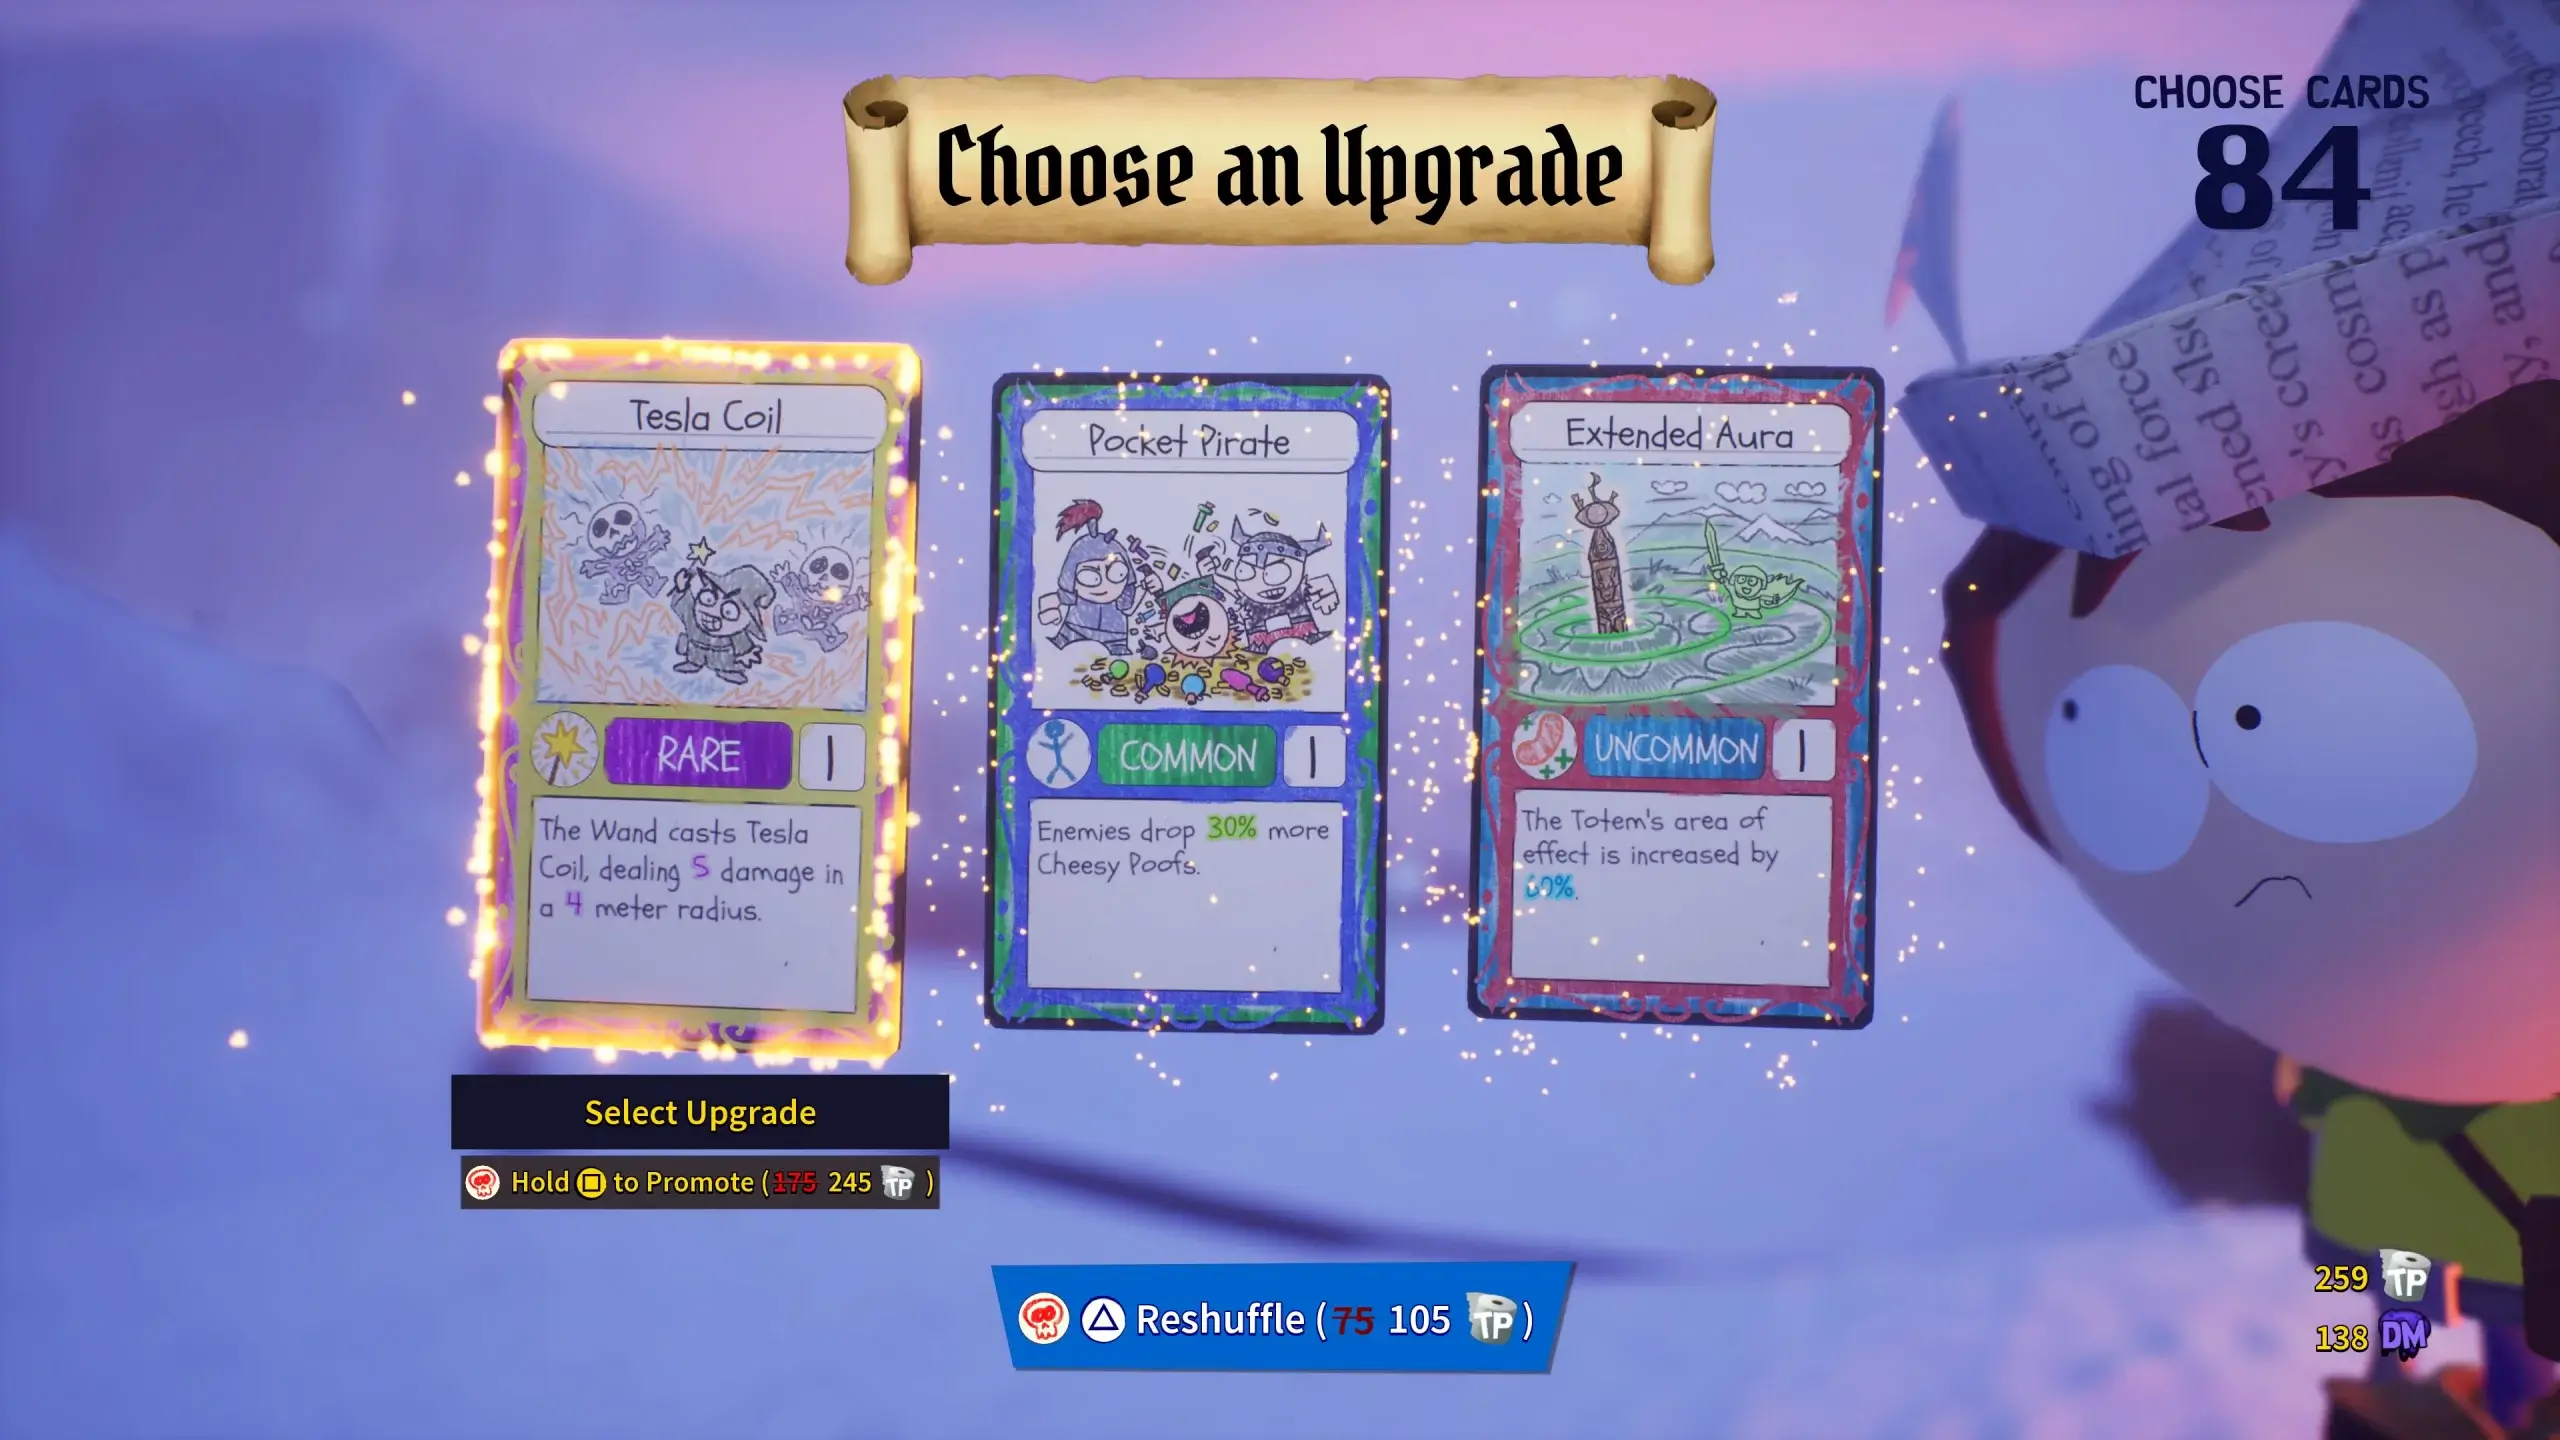 These are the three cards that jimmy (the character poking from the right) has offered me. They each have a picture that is drawn and small description of what they do. 